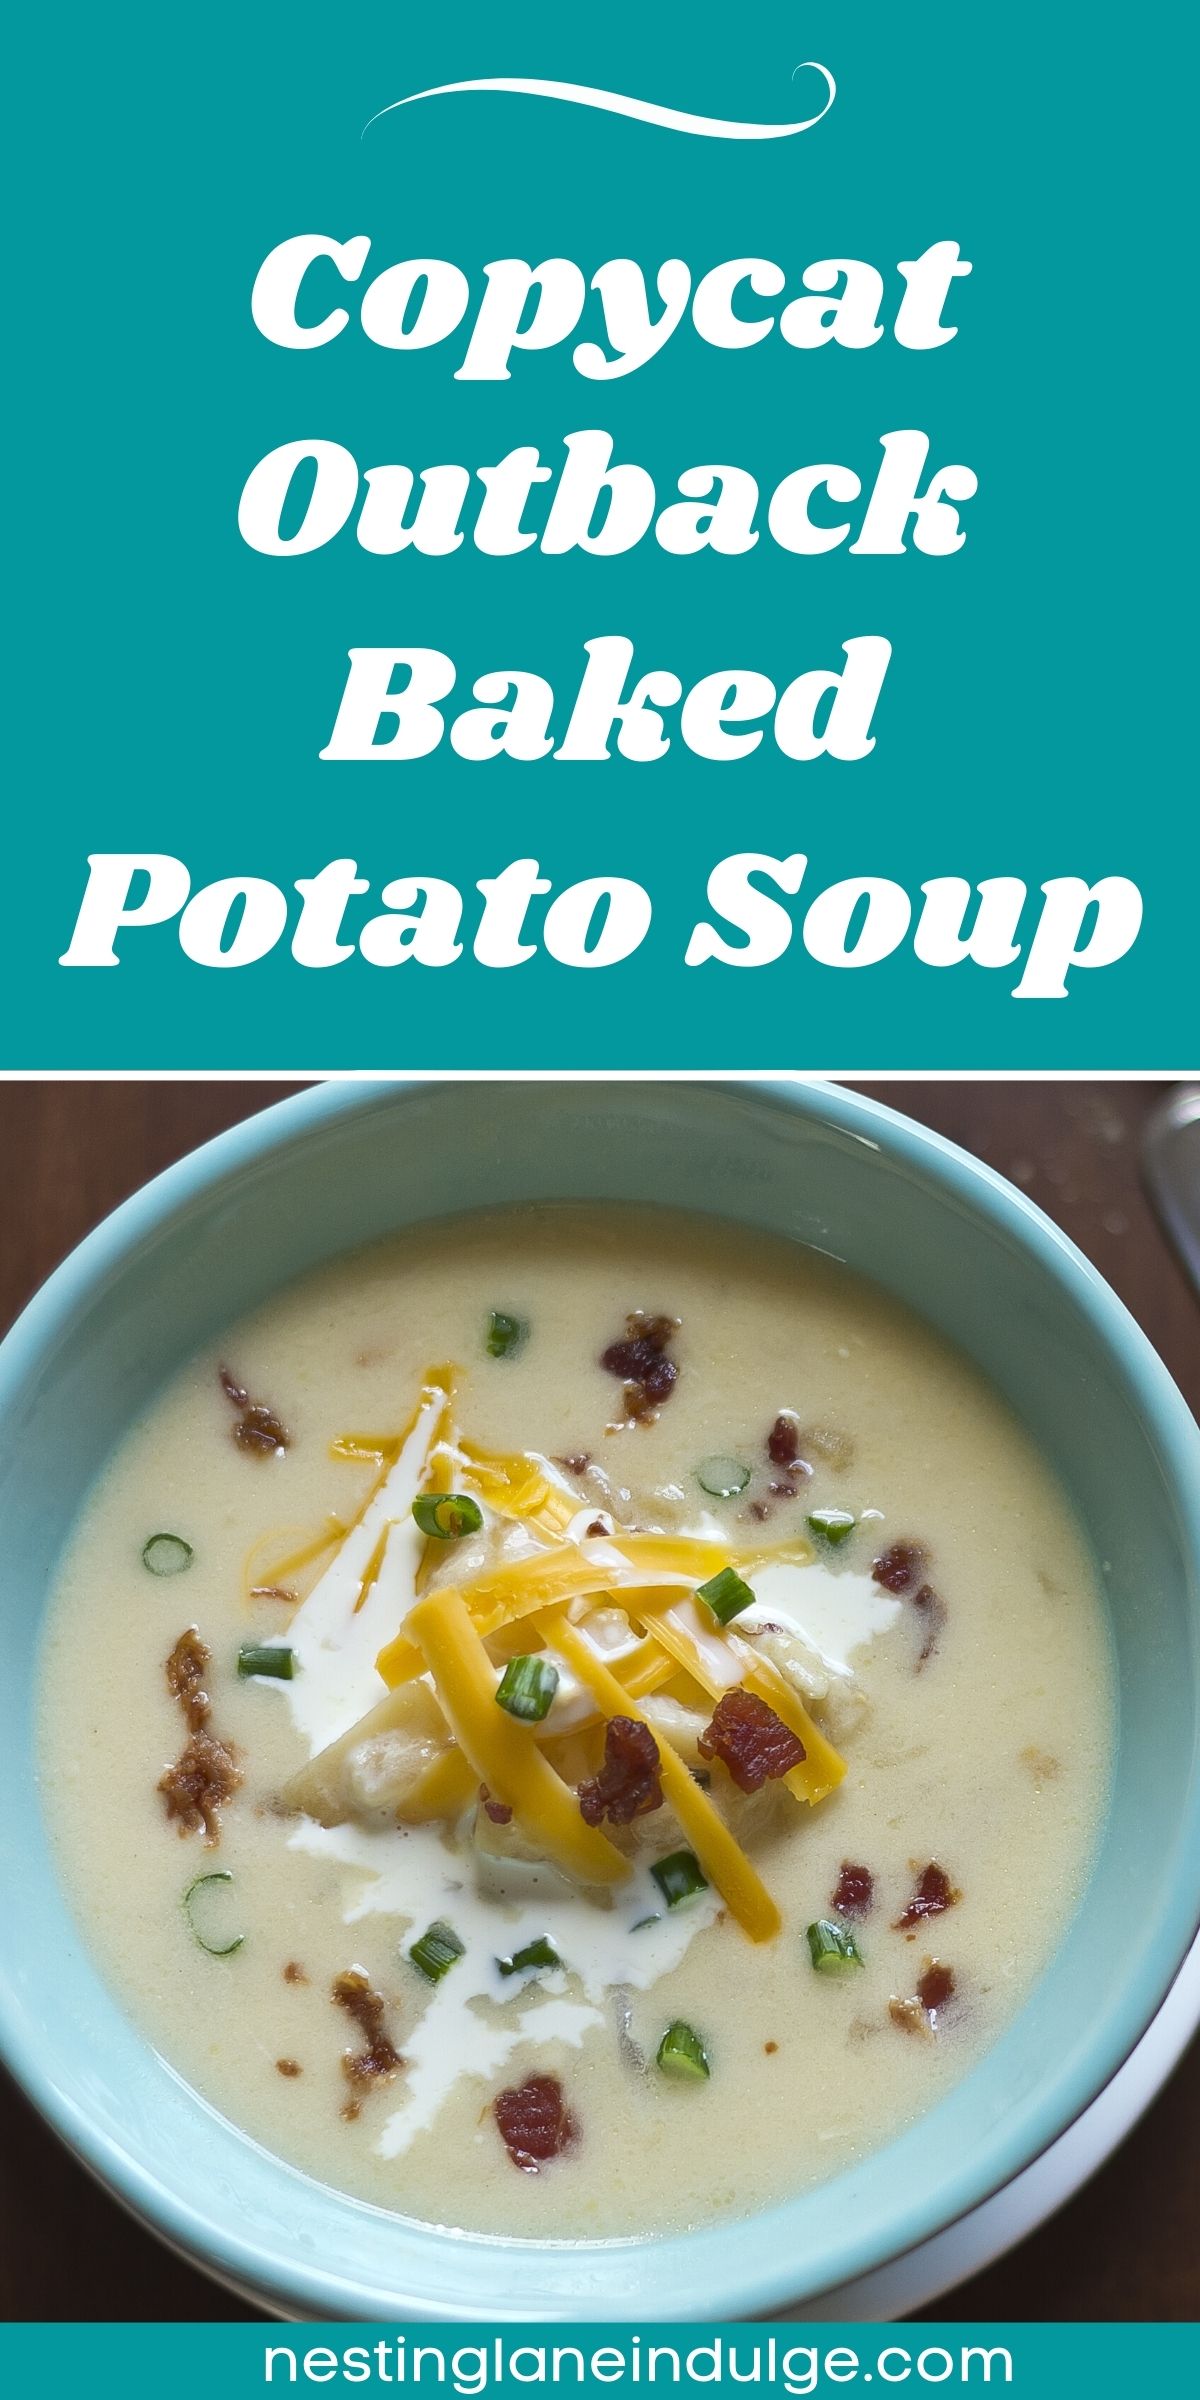 Graphic for Pinterest of Copycat Outback Steakhouse Baked Potato Soup Recipe.